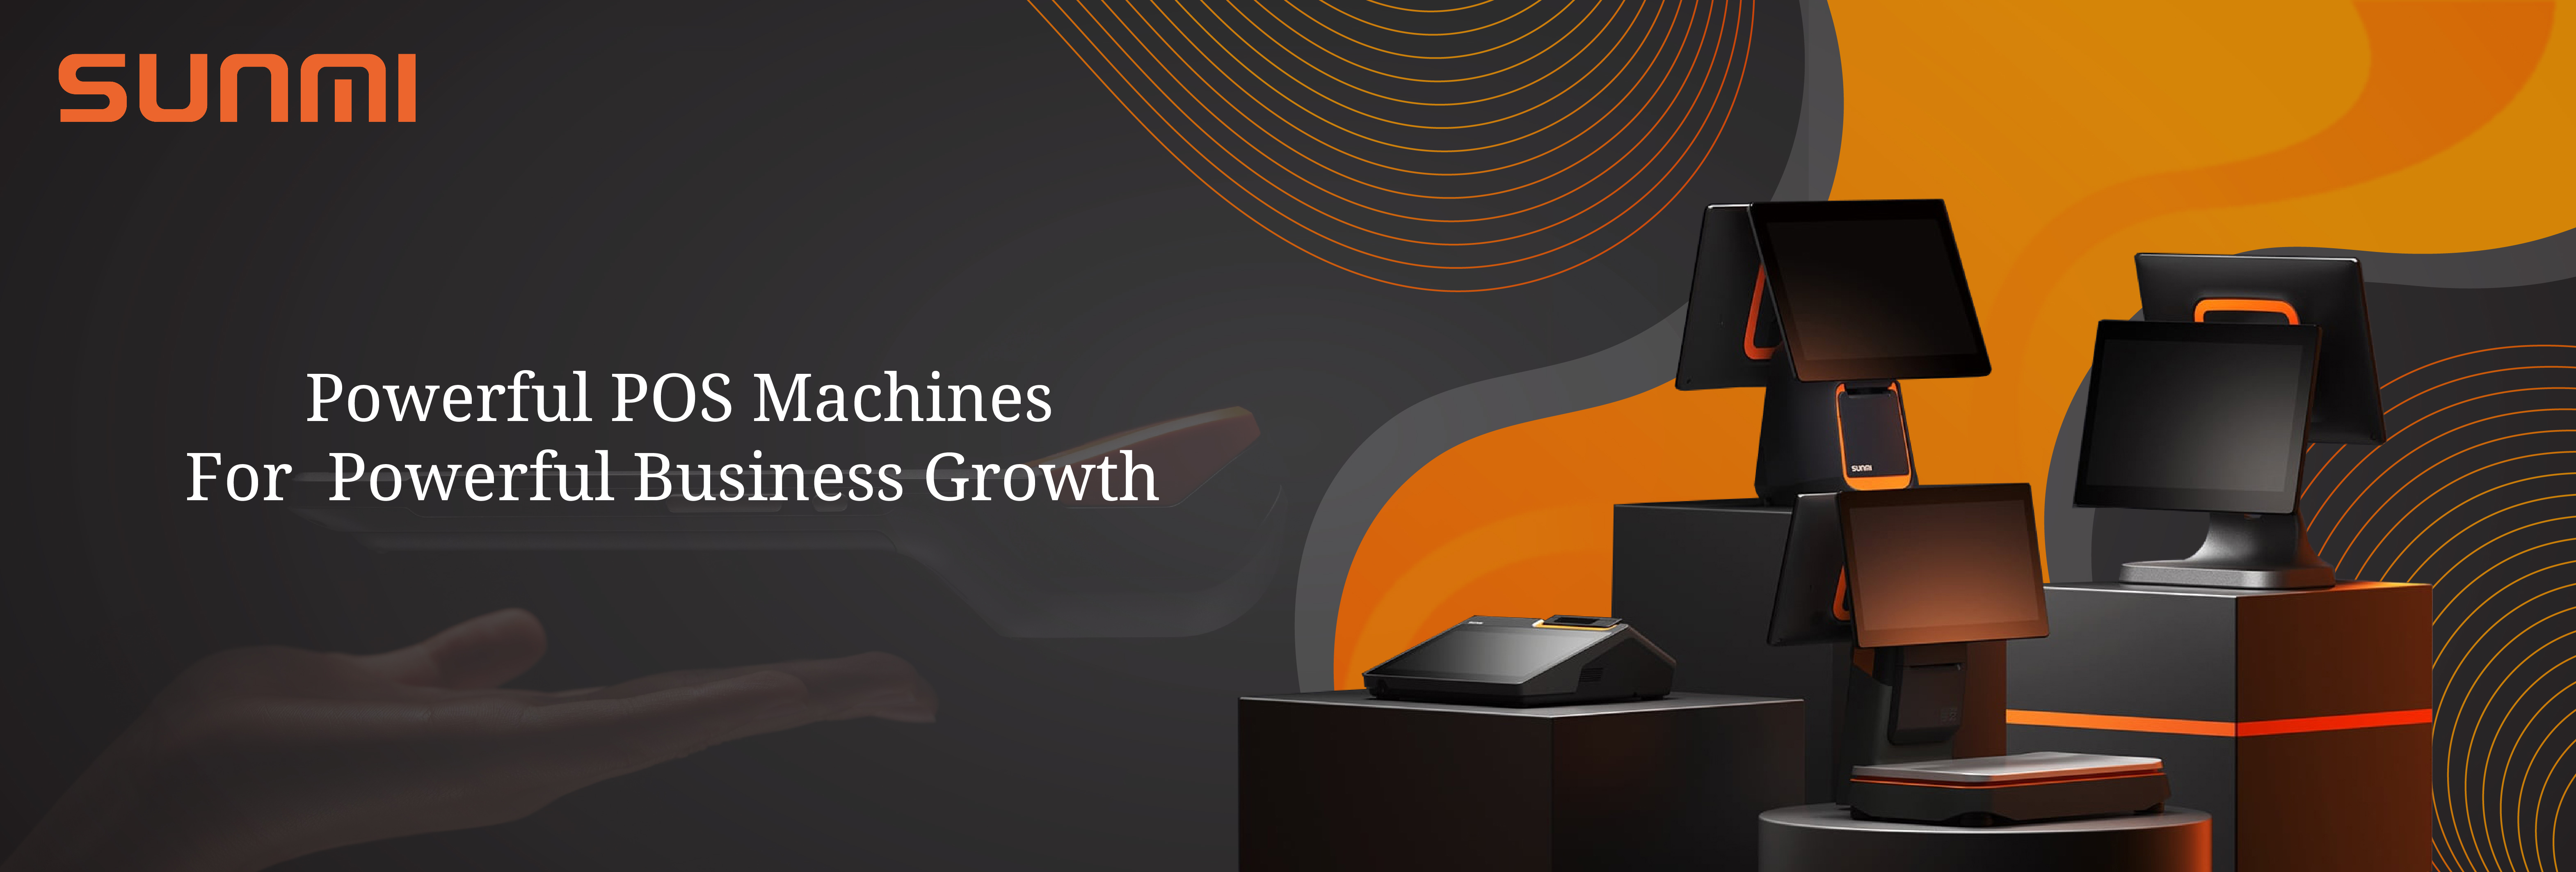 Infome technologies:Powerful POS Machines For Powerful Business Growth